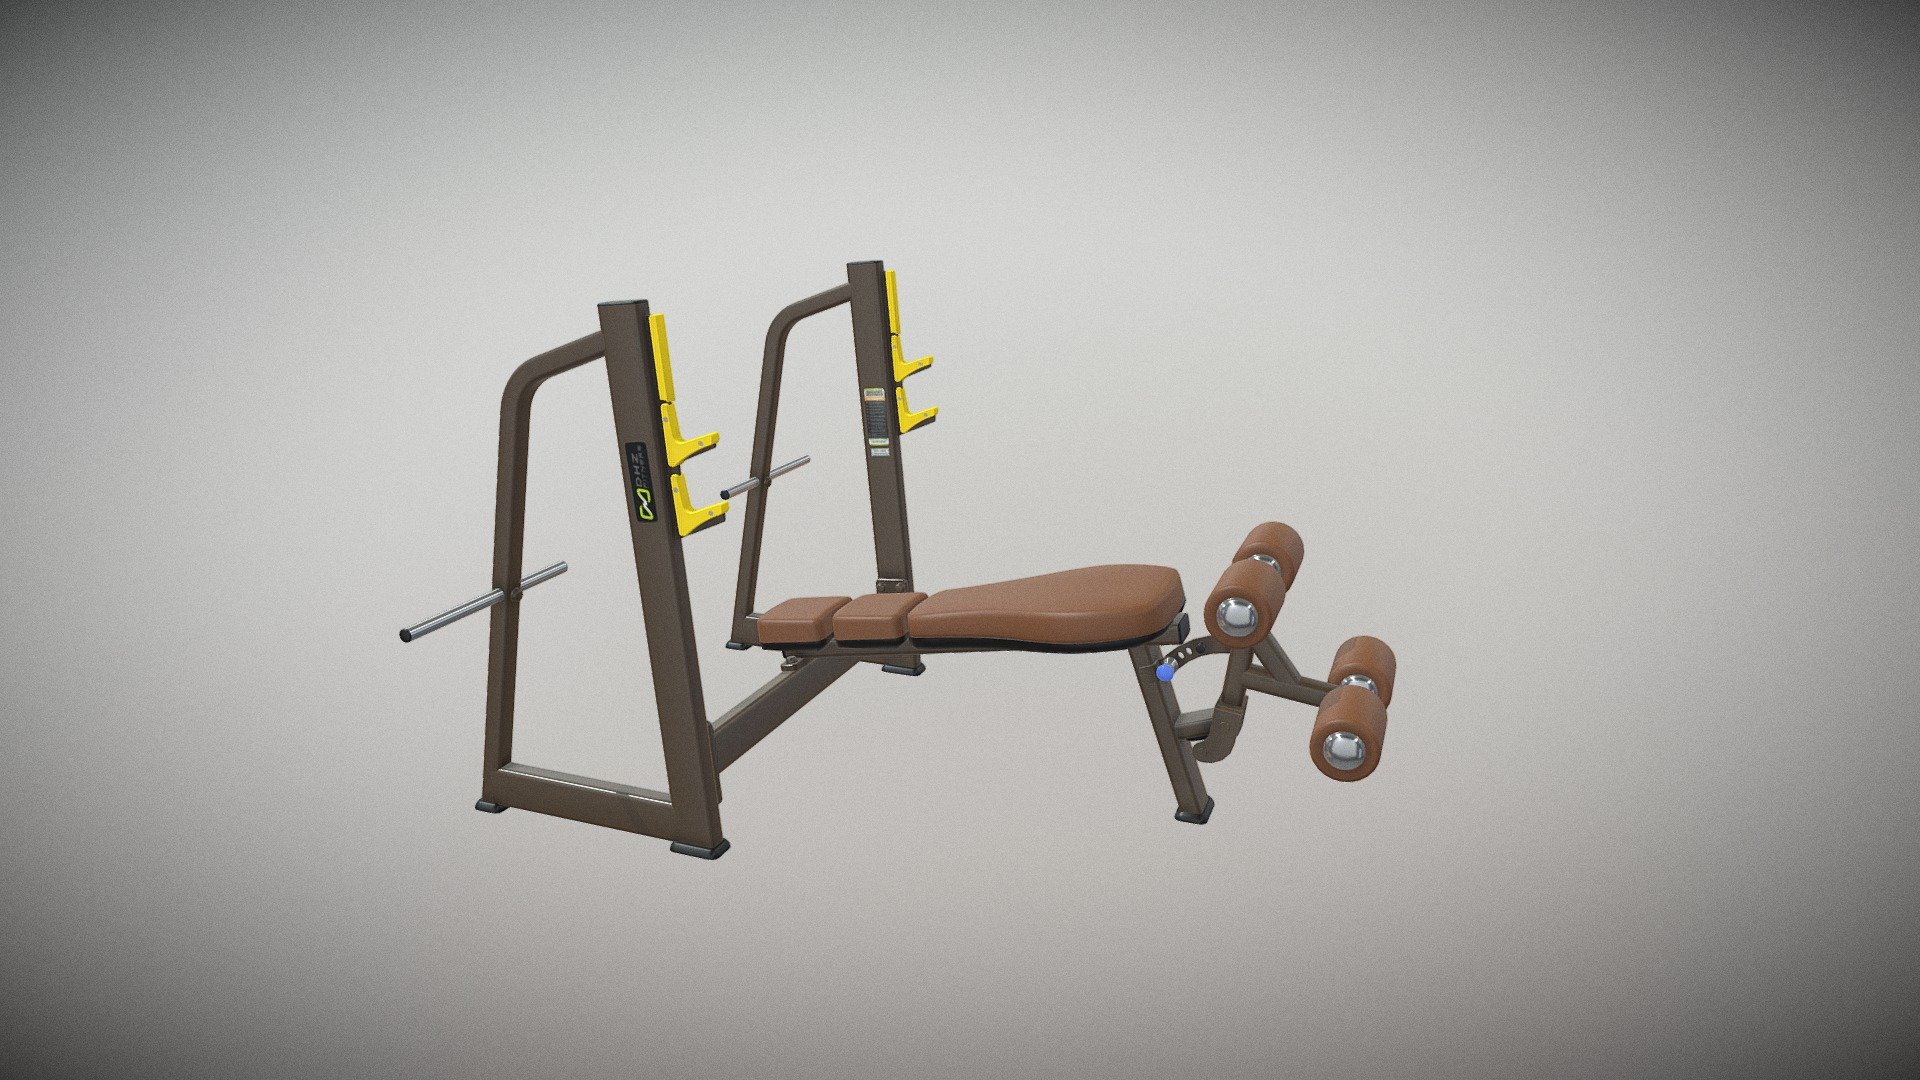 http://dhz-fitness.de/style-1#E1041 - OLYMPIC DECLINE BENCH - 3D model by supersport-fitness 3d model